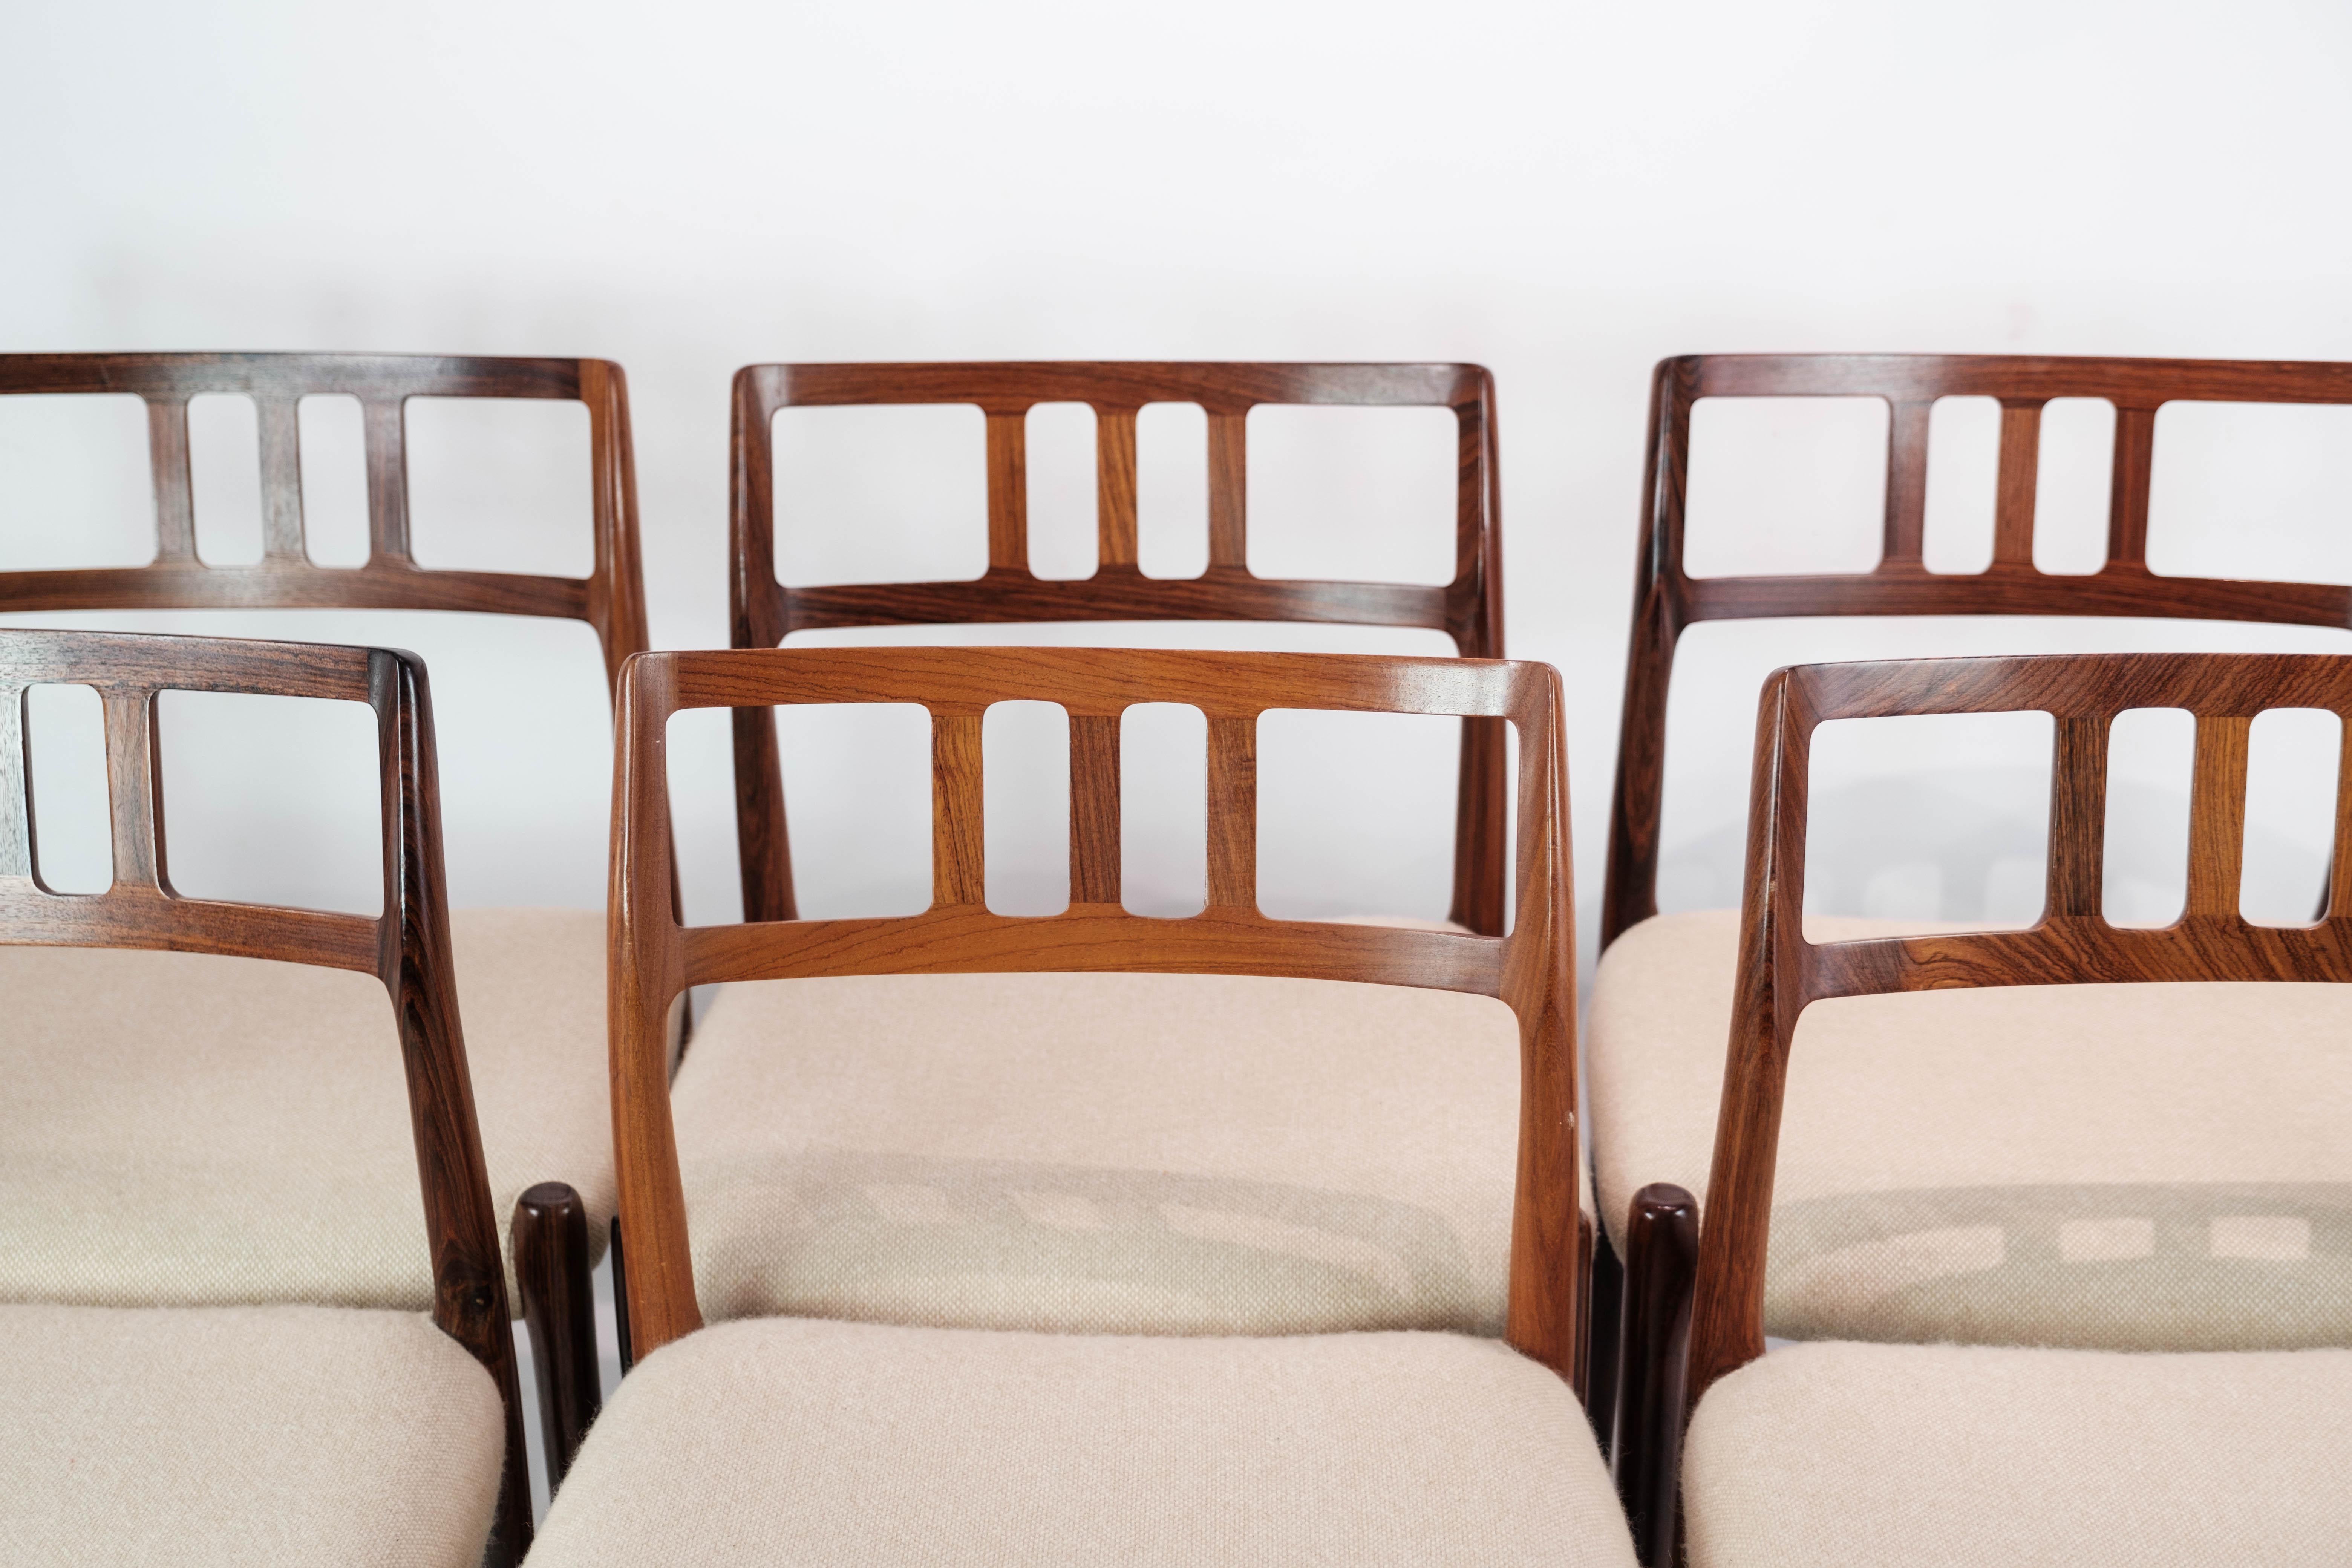 A set of six dining room chairs, model 79, designed by N.O. Moeller in 1966 and manufactured by J.L. Moeller in the late 1960s. The chairs are made of rosewood and light seats.